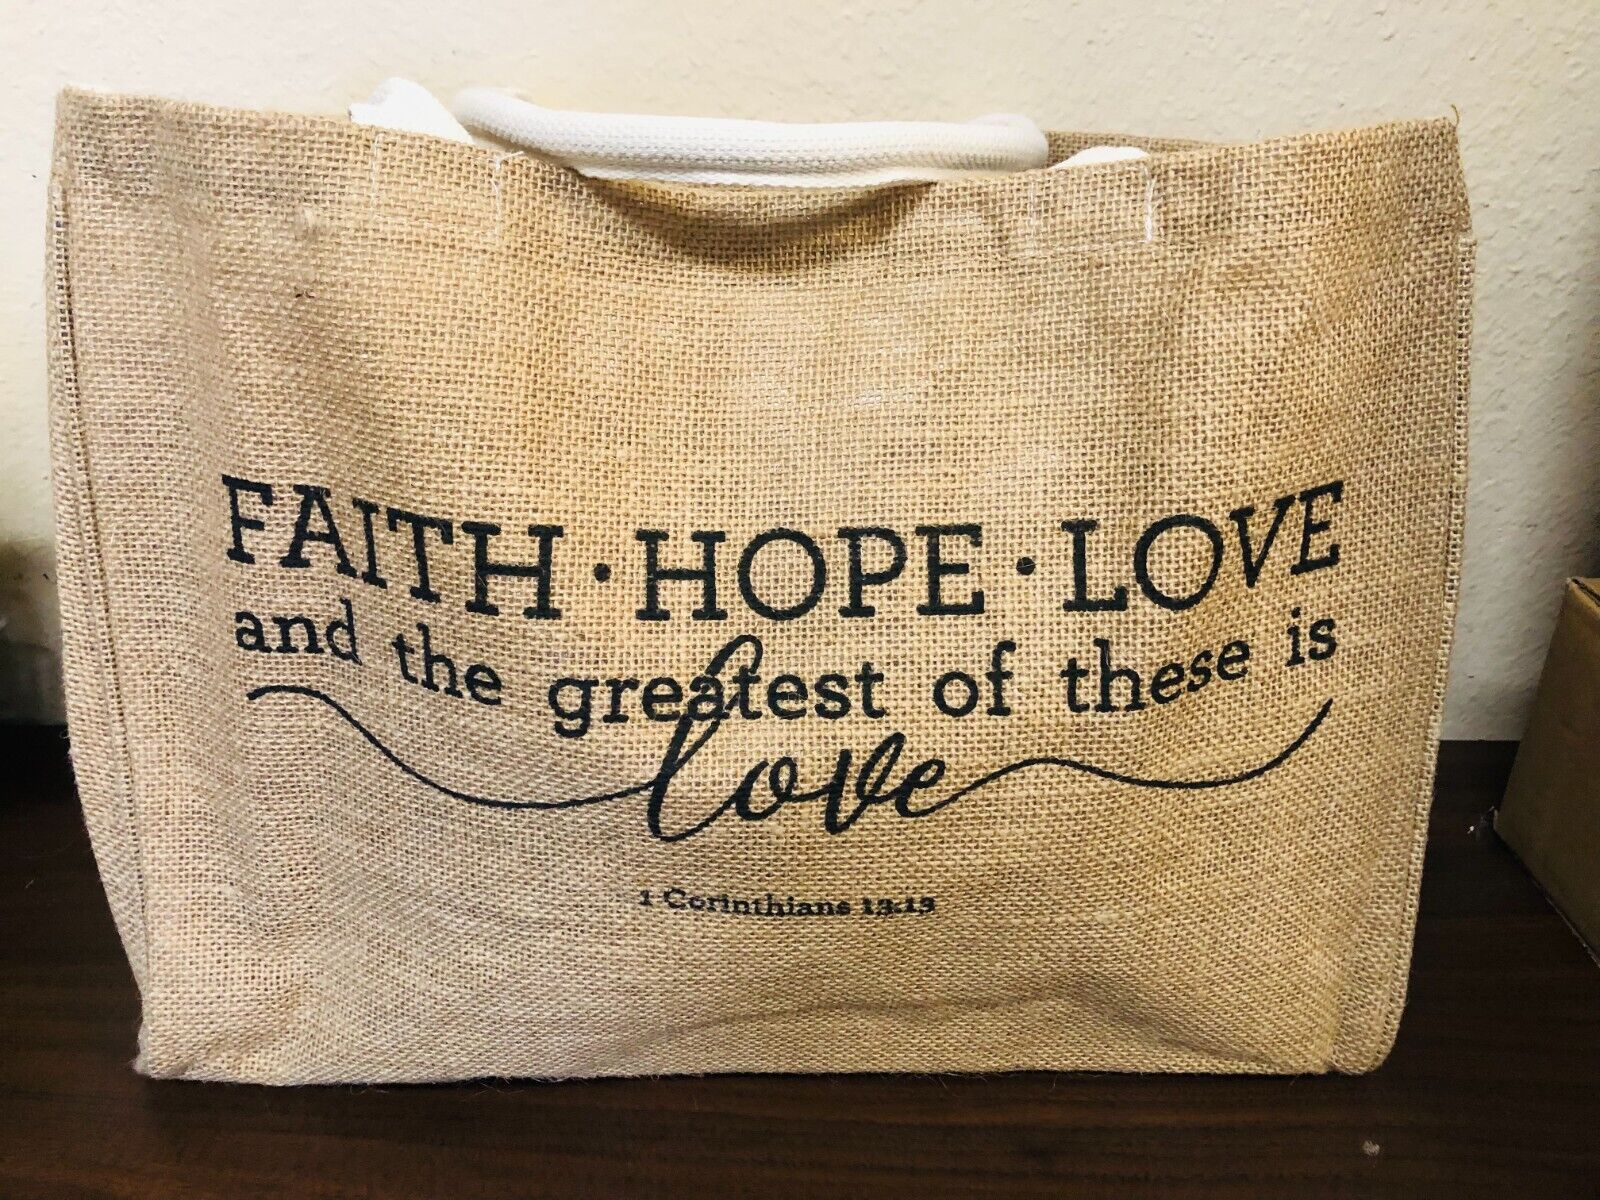 Jute Large Tote, "Faith-Hope-Love", 16.5"x12.5", New - Bob and Penny Lord